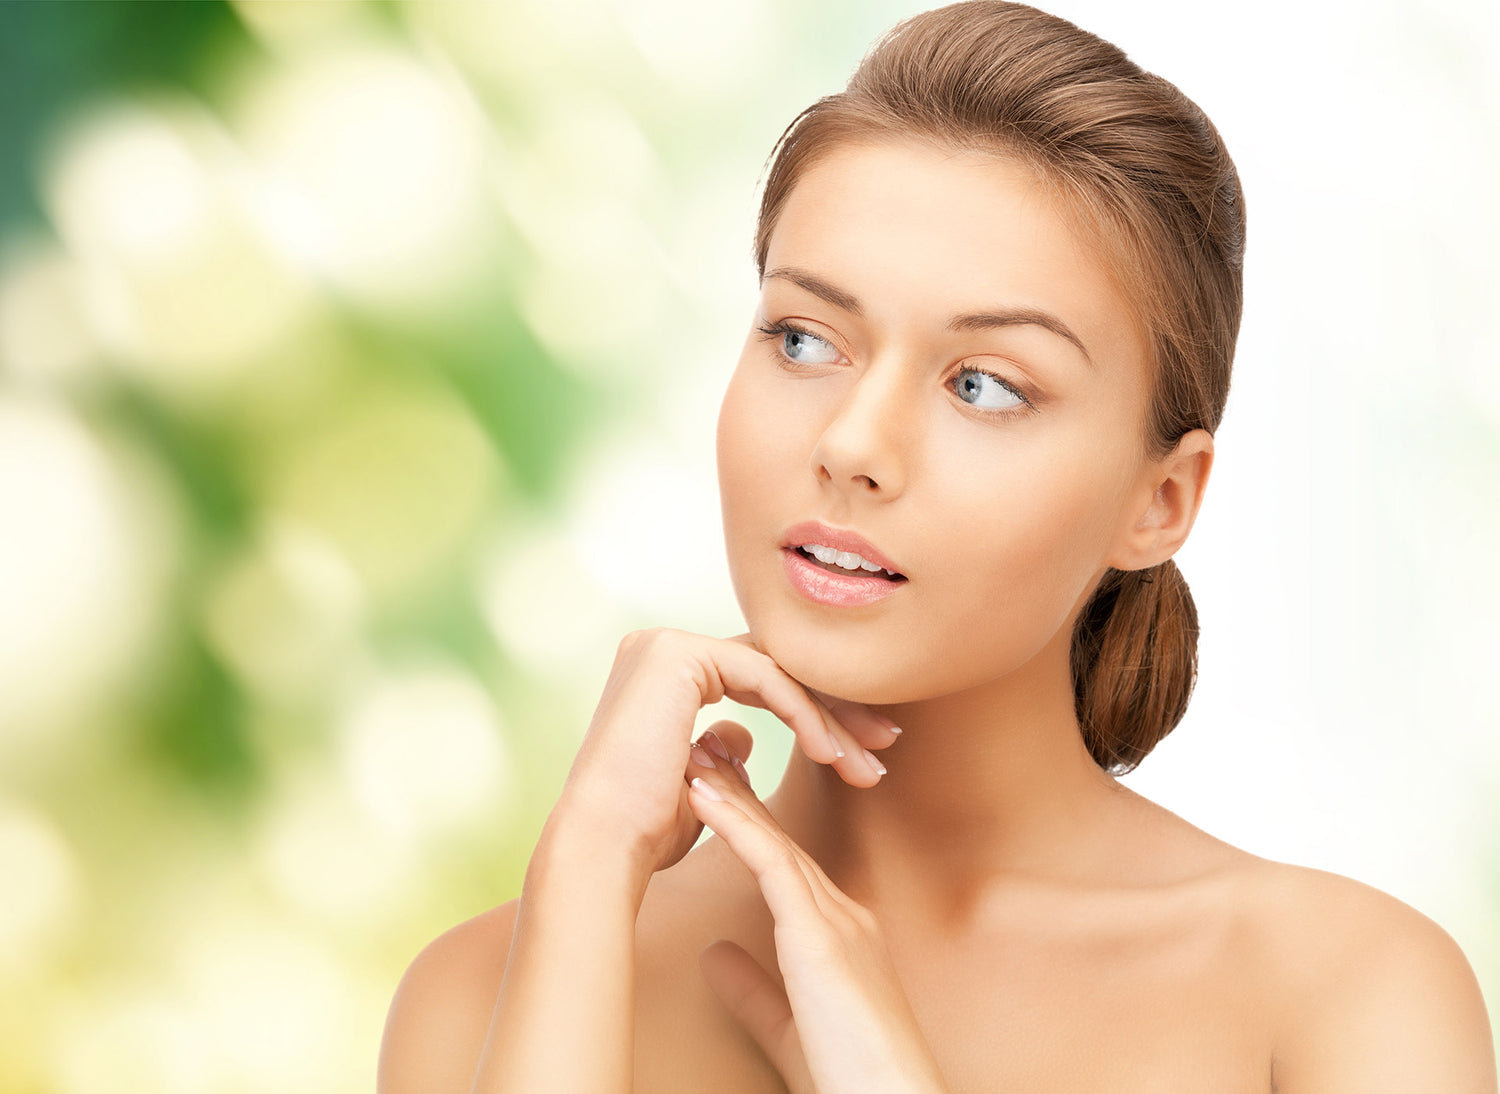 10 Best Skincare Tips From Dermatologists